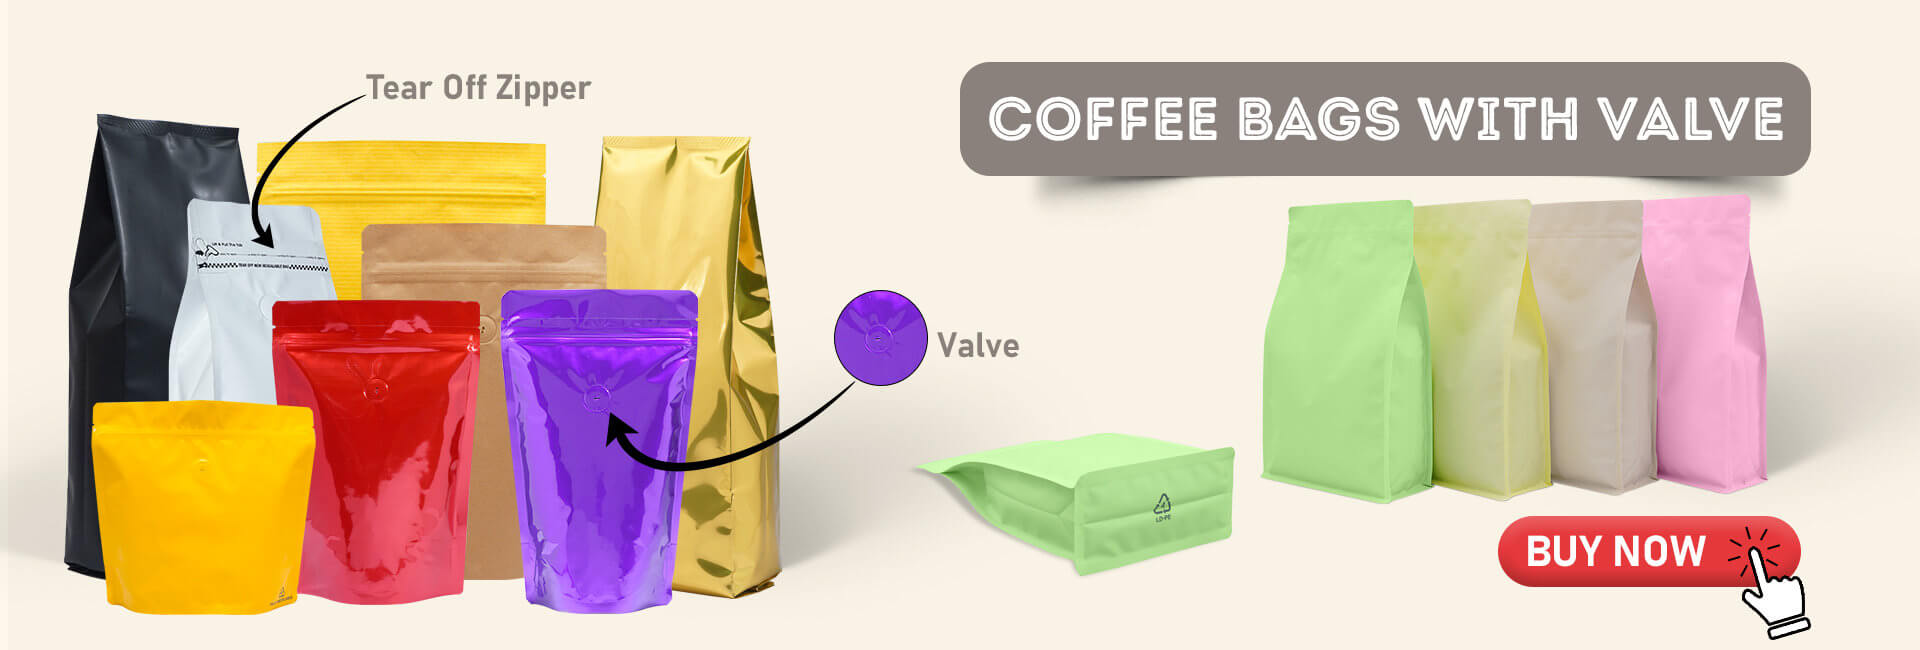 Coffee Bags with Valve